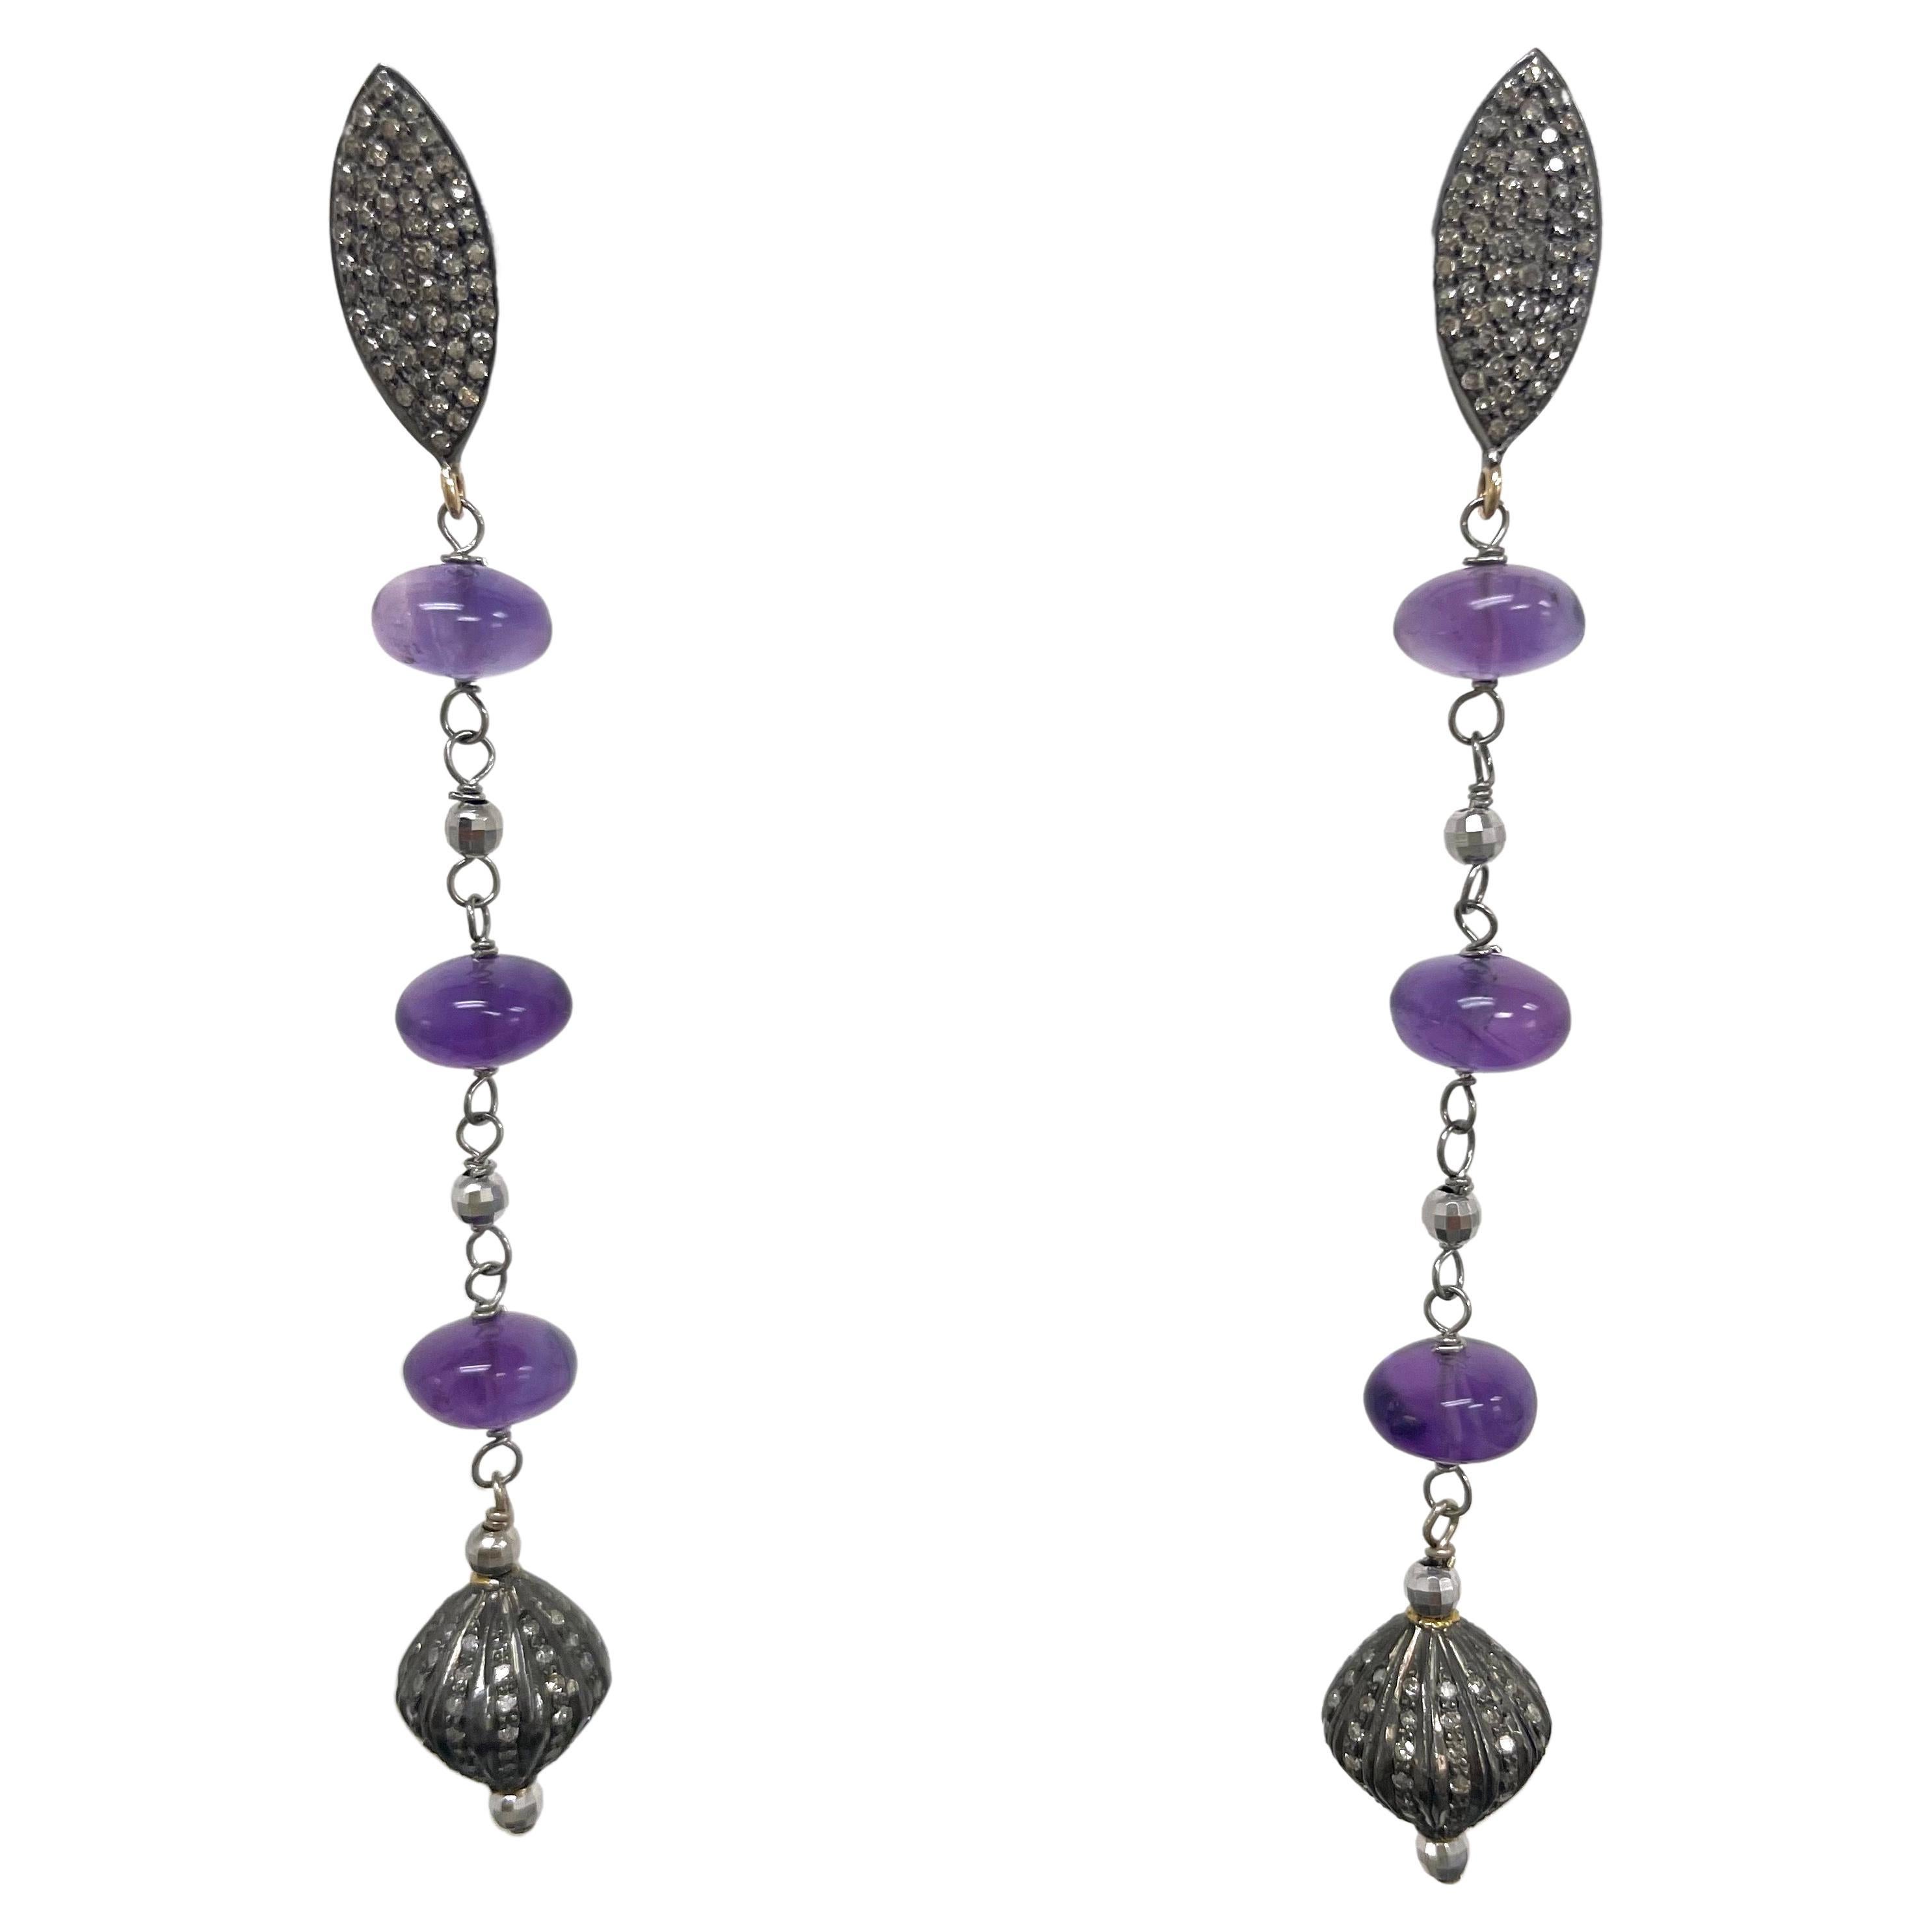 Description
Elegant statement Amethyst dangle earrings with pave diamond drops and marquise shape diamond studs.
Item # E3228

Materials and Weight
Amethyst, 18 carats, 9mm, smooth rondelle shape
Pave diamonds studs with gold posts and jumbo